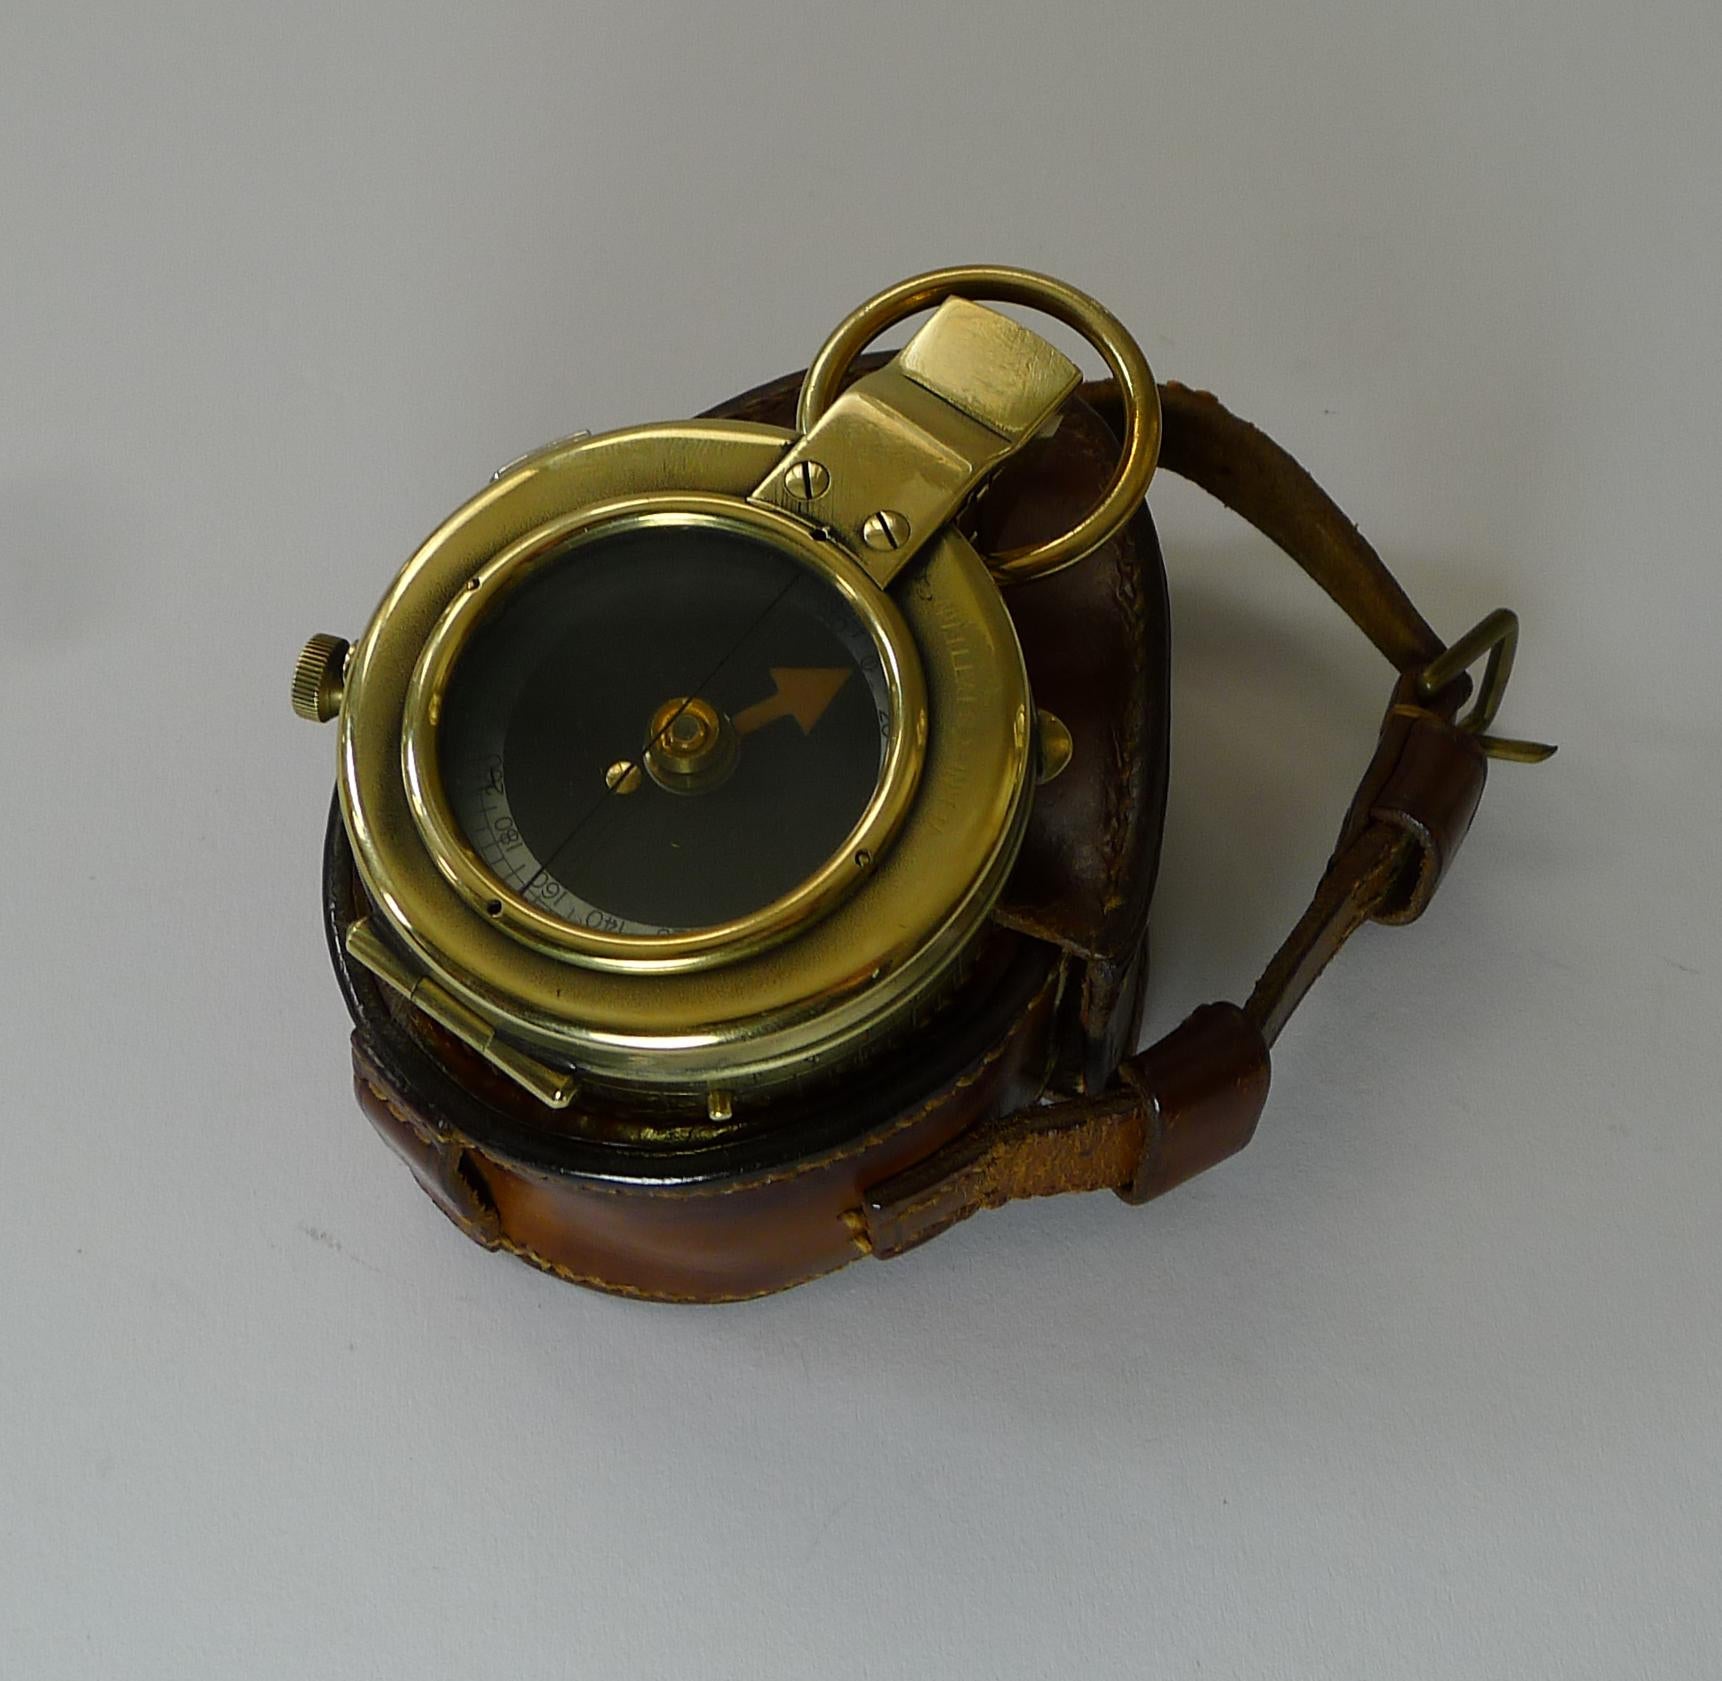 WWI 1917 British Army Officer's Compass, Verner's Patent Mk viii by French Ltd 5